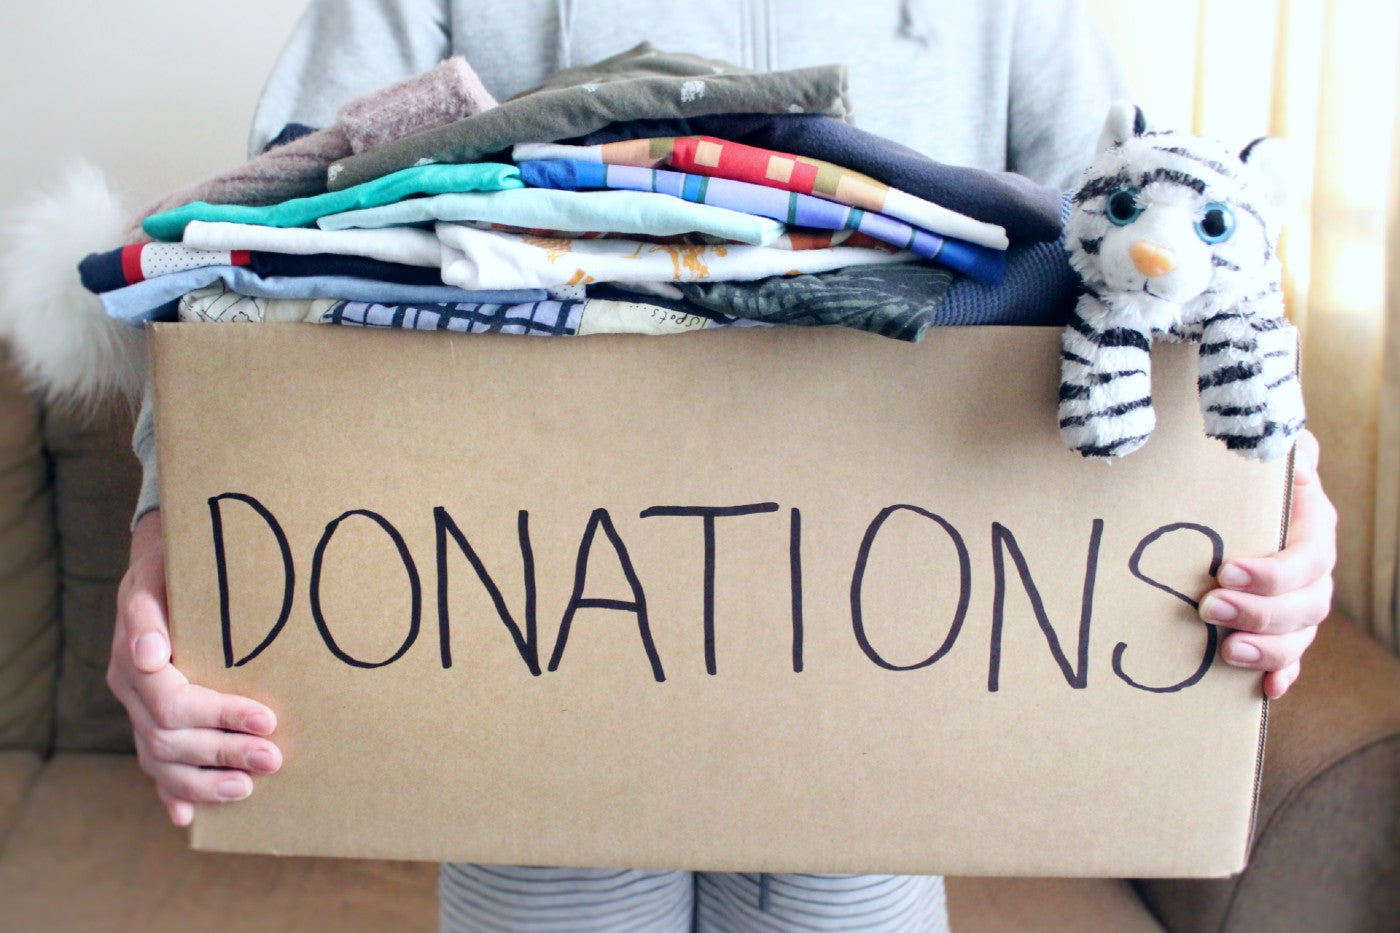 What to do with old clothes you can't donate